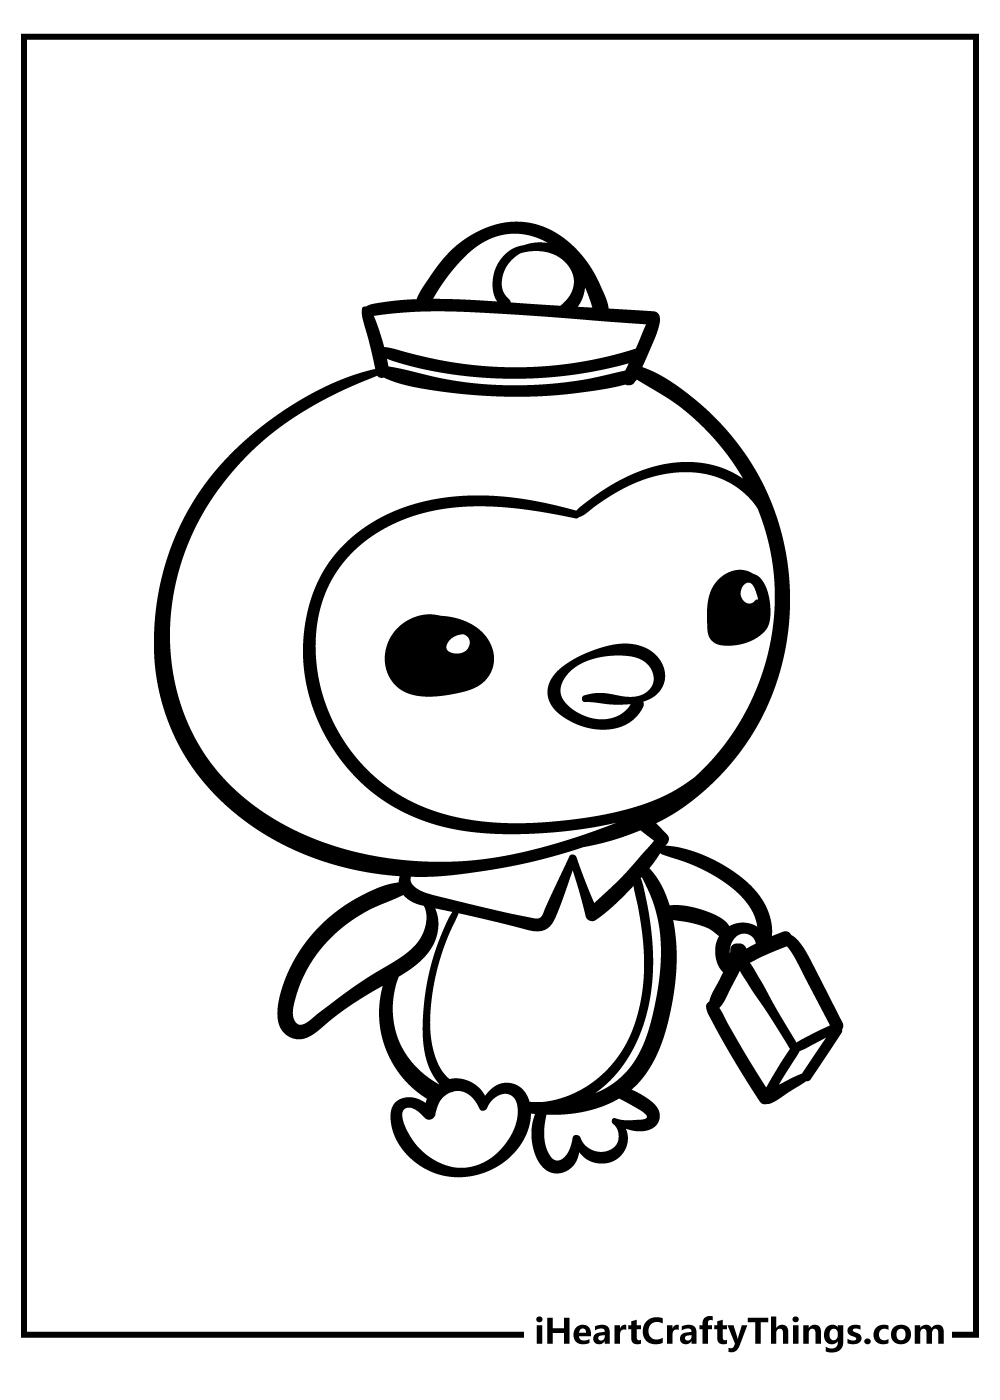 Octonauts Coloring Pages free pdf download